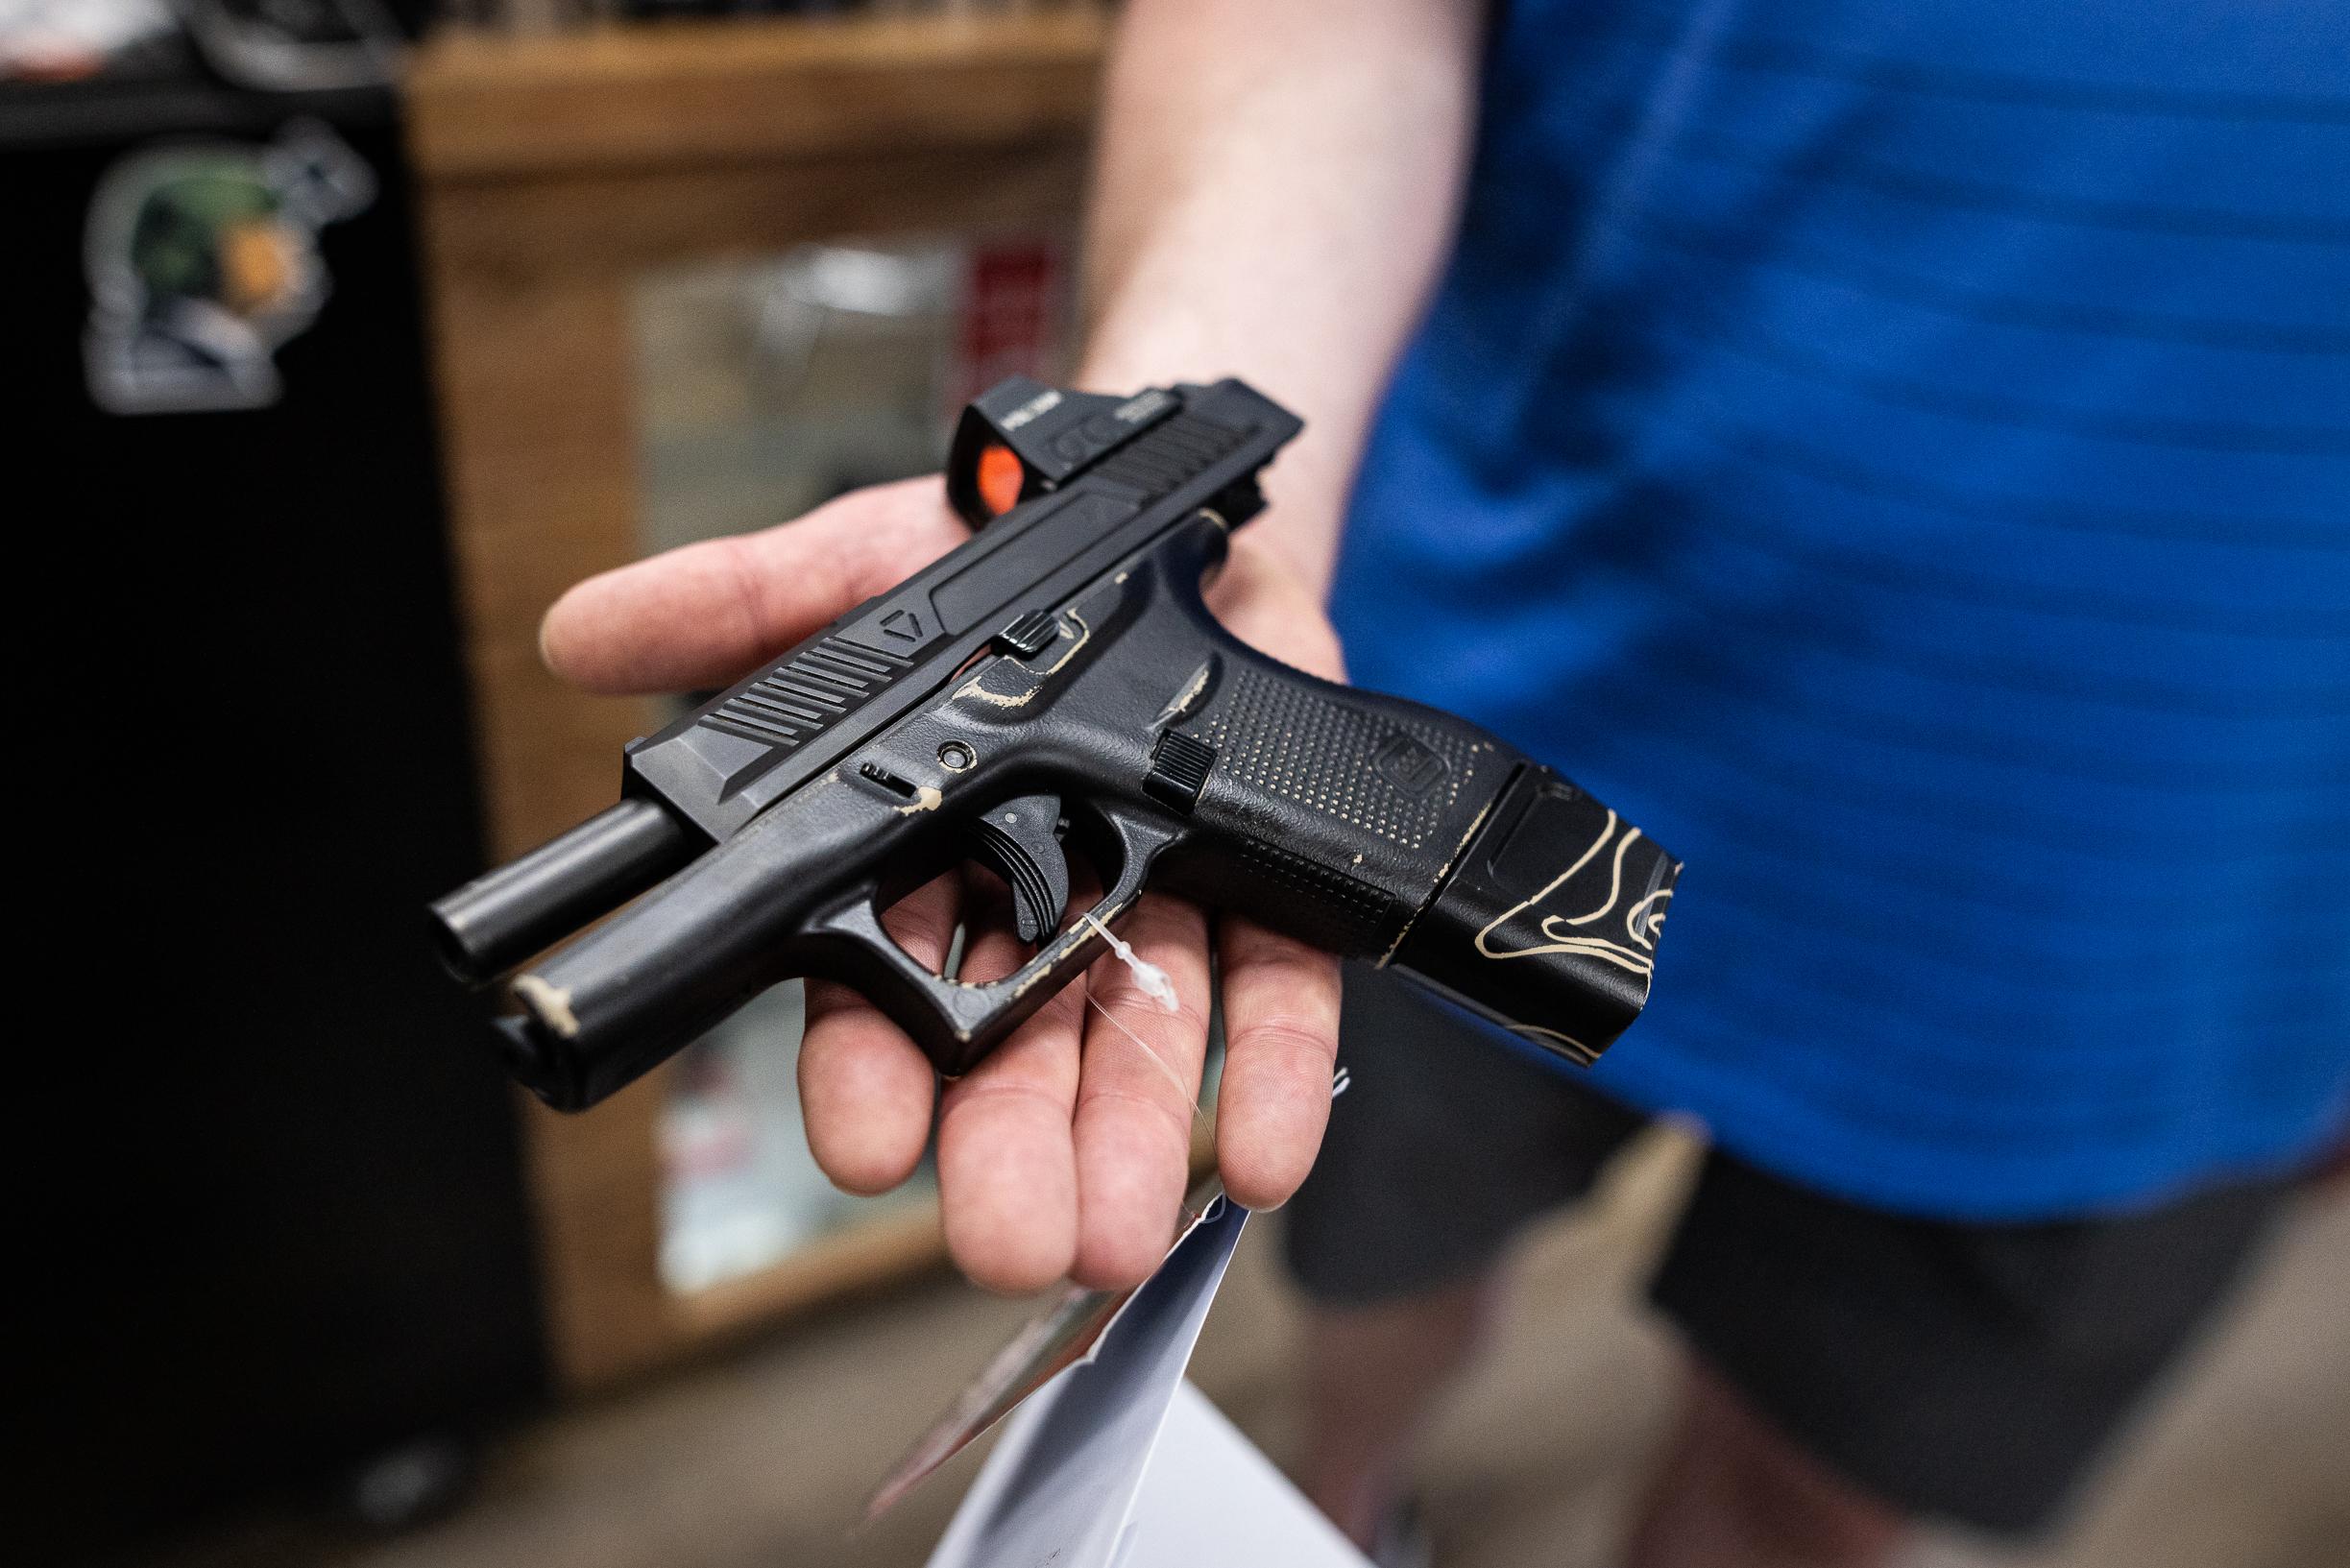 California Law Making Credit Card Companies Track Firearms Sales Goes Into Effect July 1